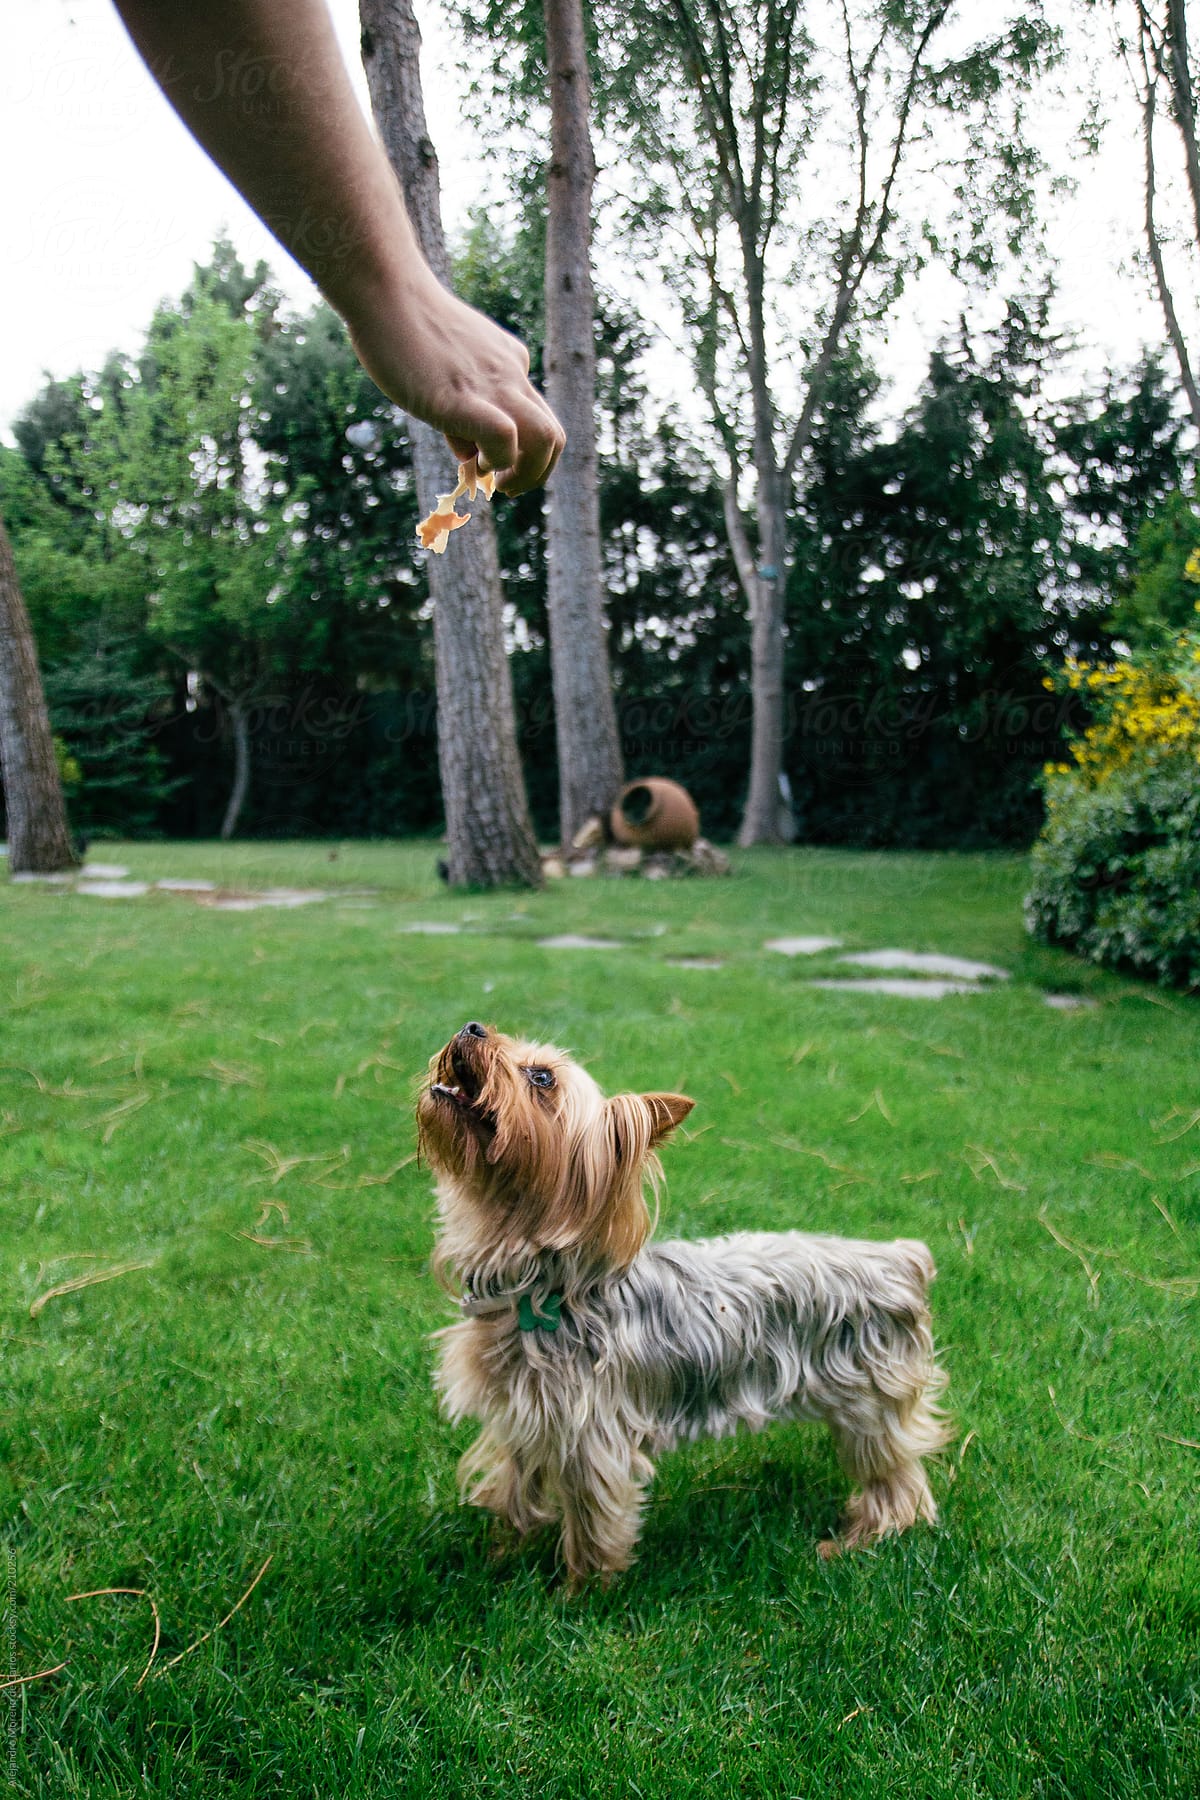 Man giving food prize - reward to a Yorkshire terrier dog on a garden